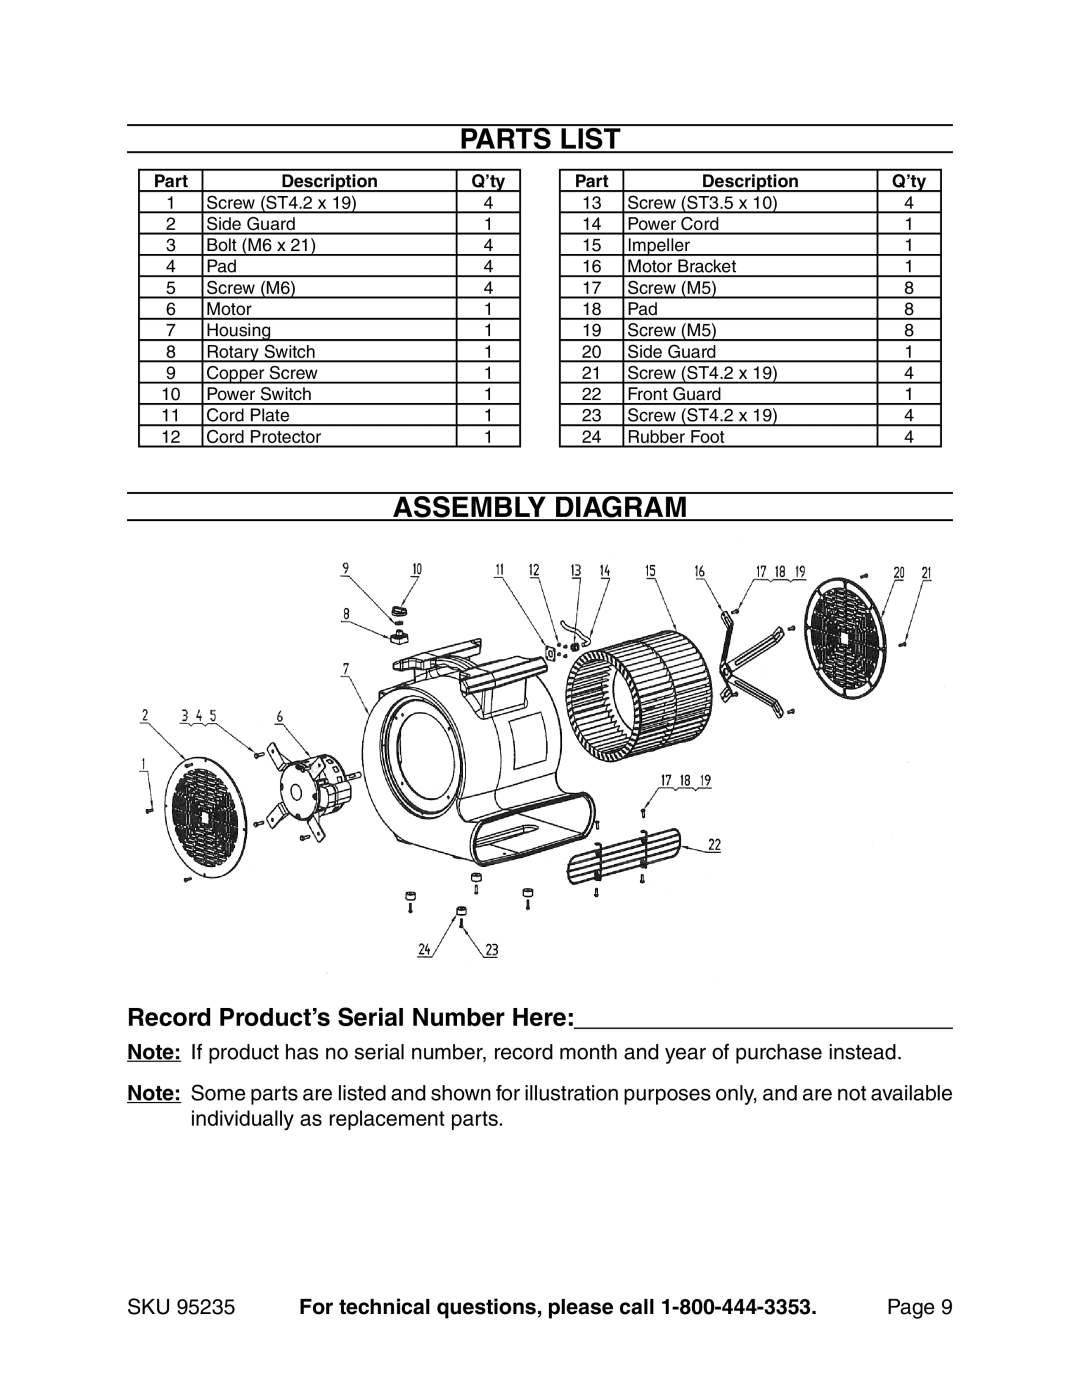 Chicago Electric 95235 manual Parts List, Assembly Diagram, Record Product’s Serial Number Here 